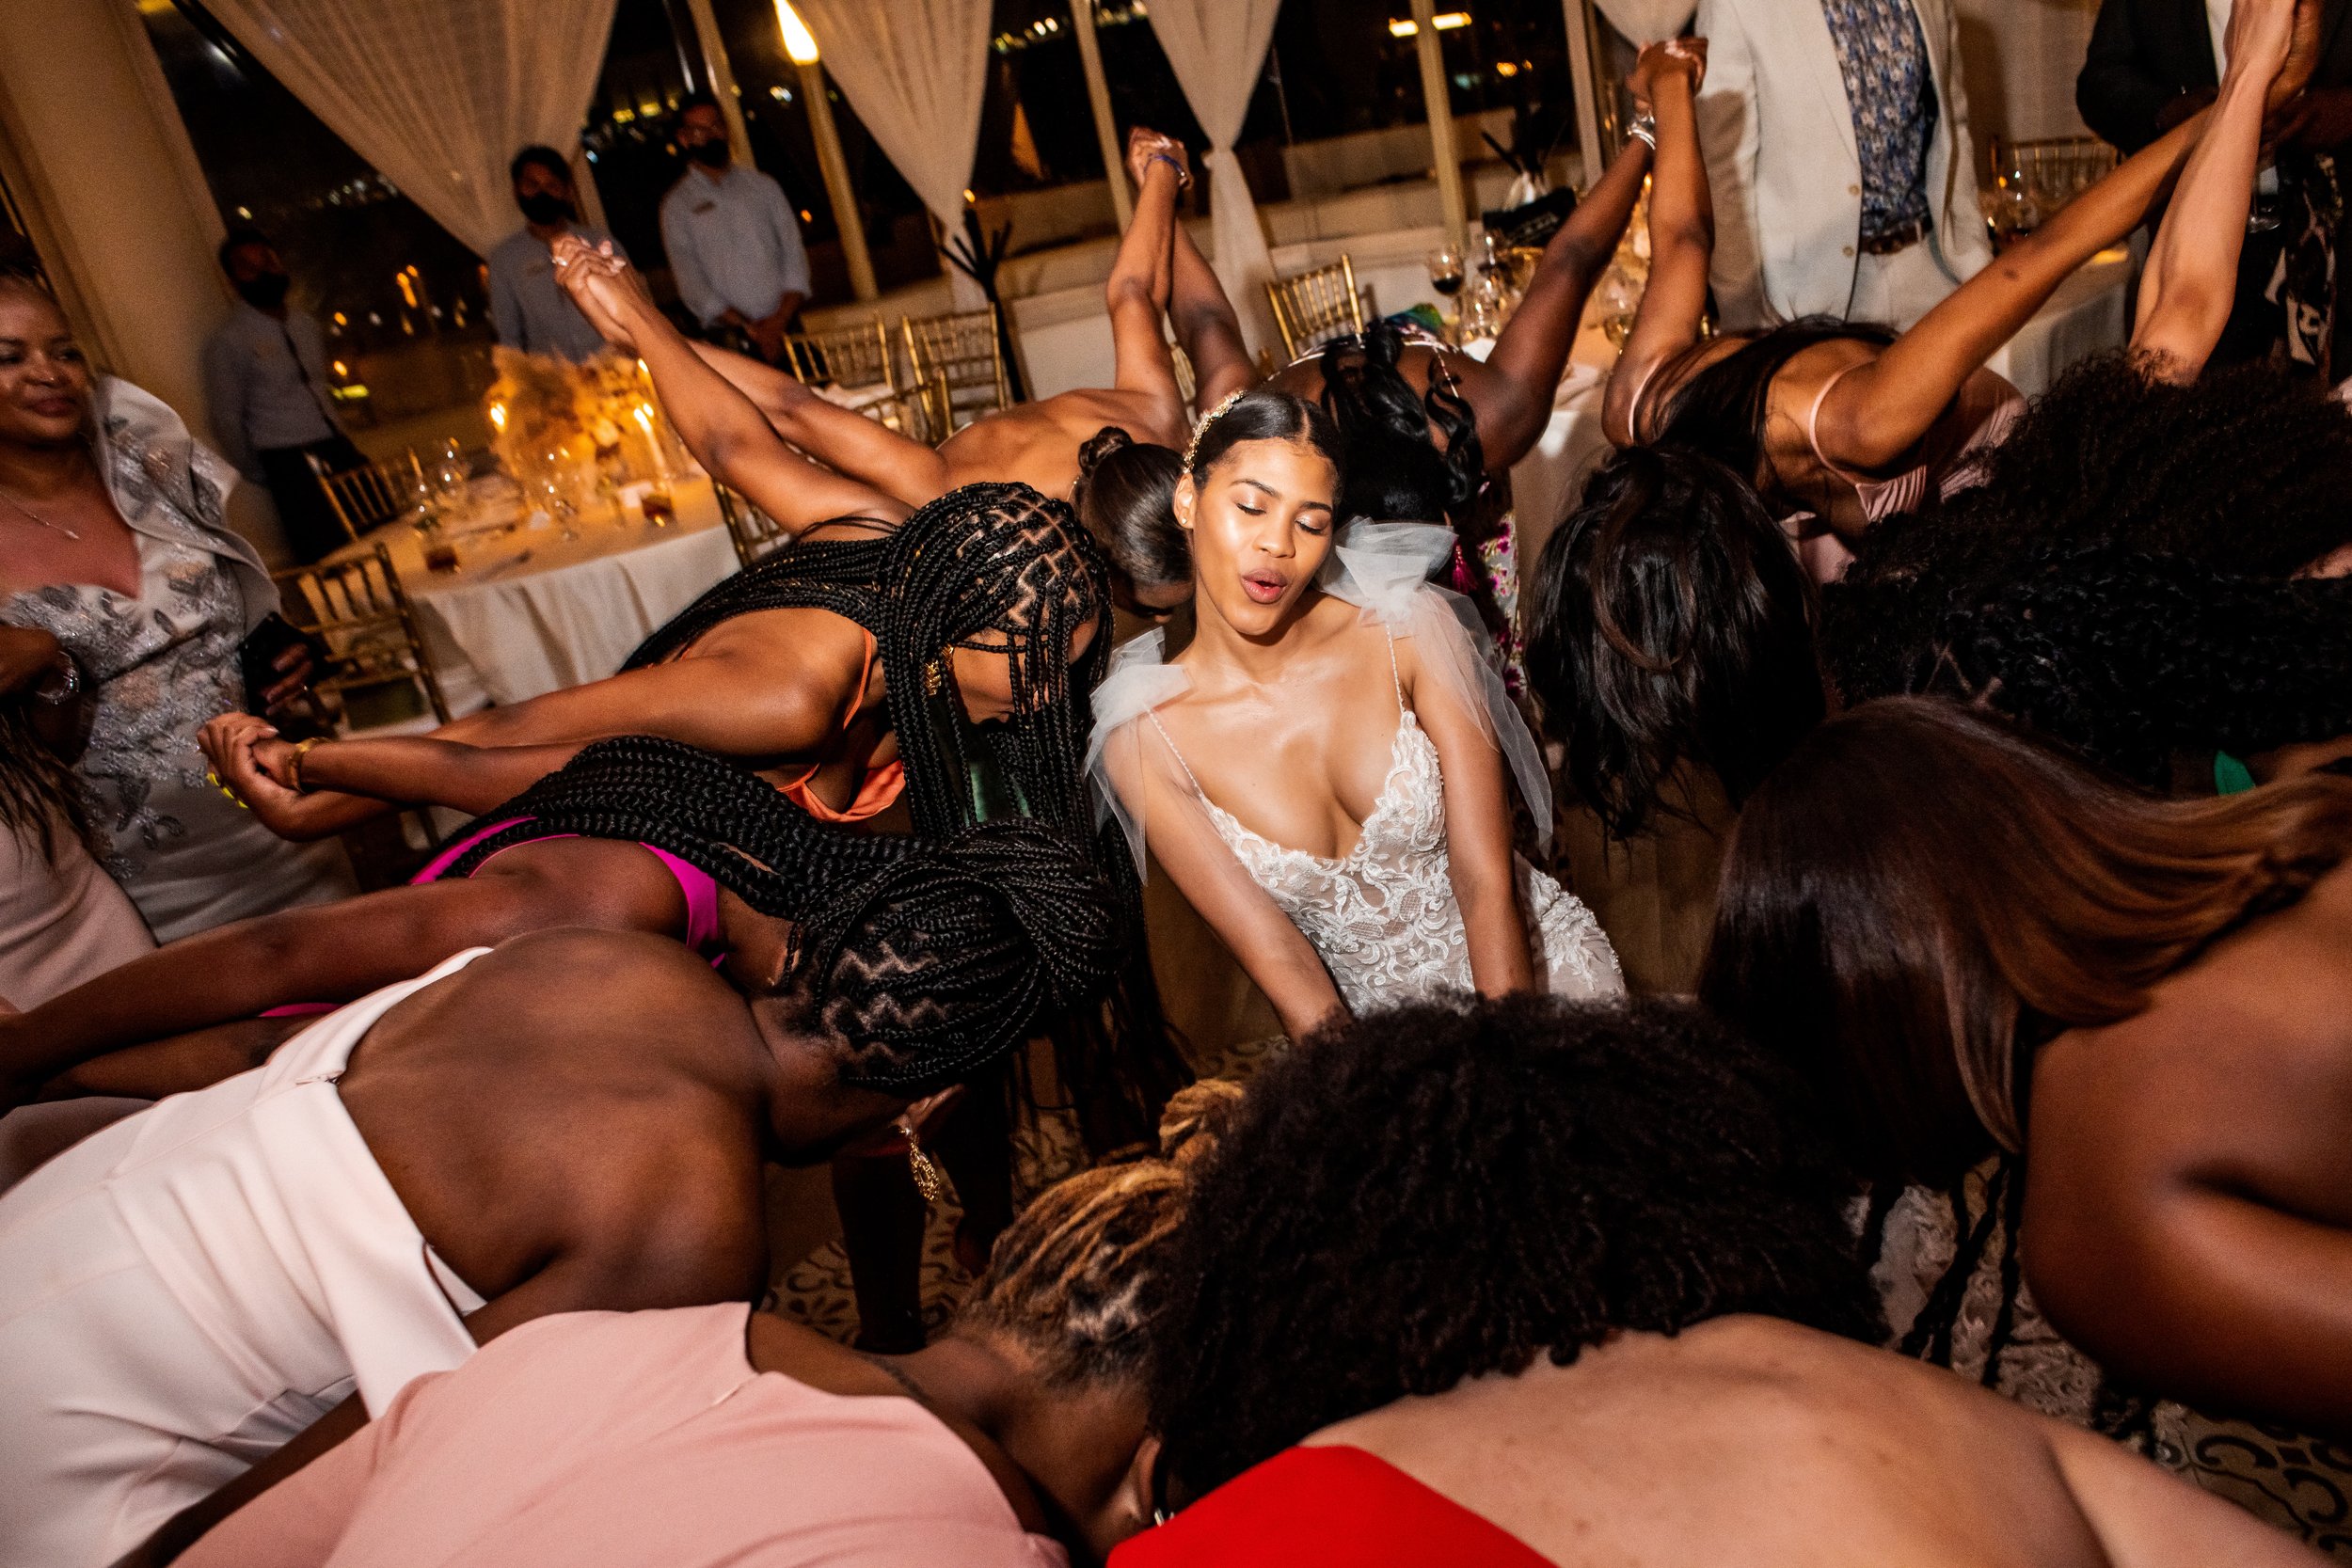 A bride dances joyously surrounded by female guests at a wedding reception, all participating in a lively group dance. the atmosphere is festive and energetic under warm, ambient lighting.